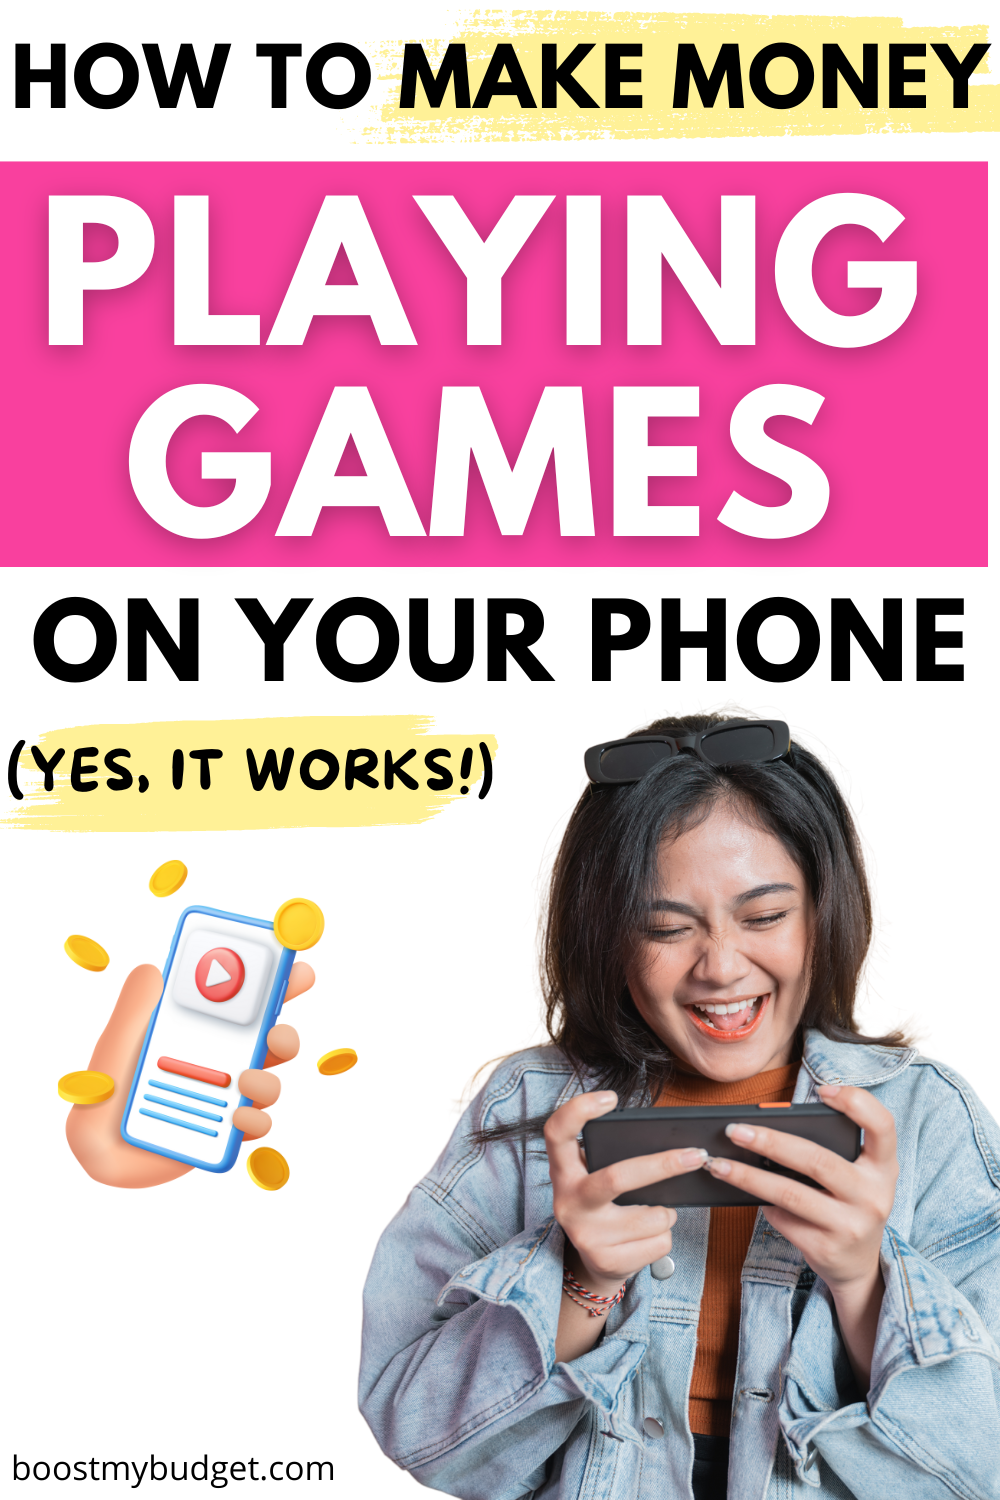 Pinterest pin image with the text: how to make money playing games on your phone. A woman excitedly looks at her smartphone while another image shows a smartphone with money around it.